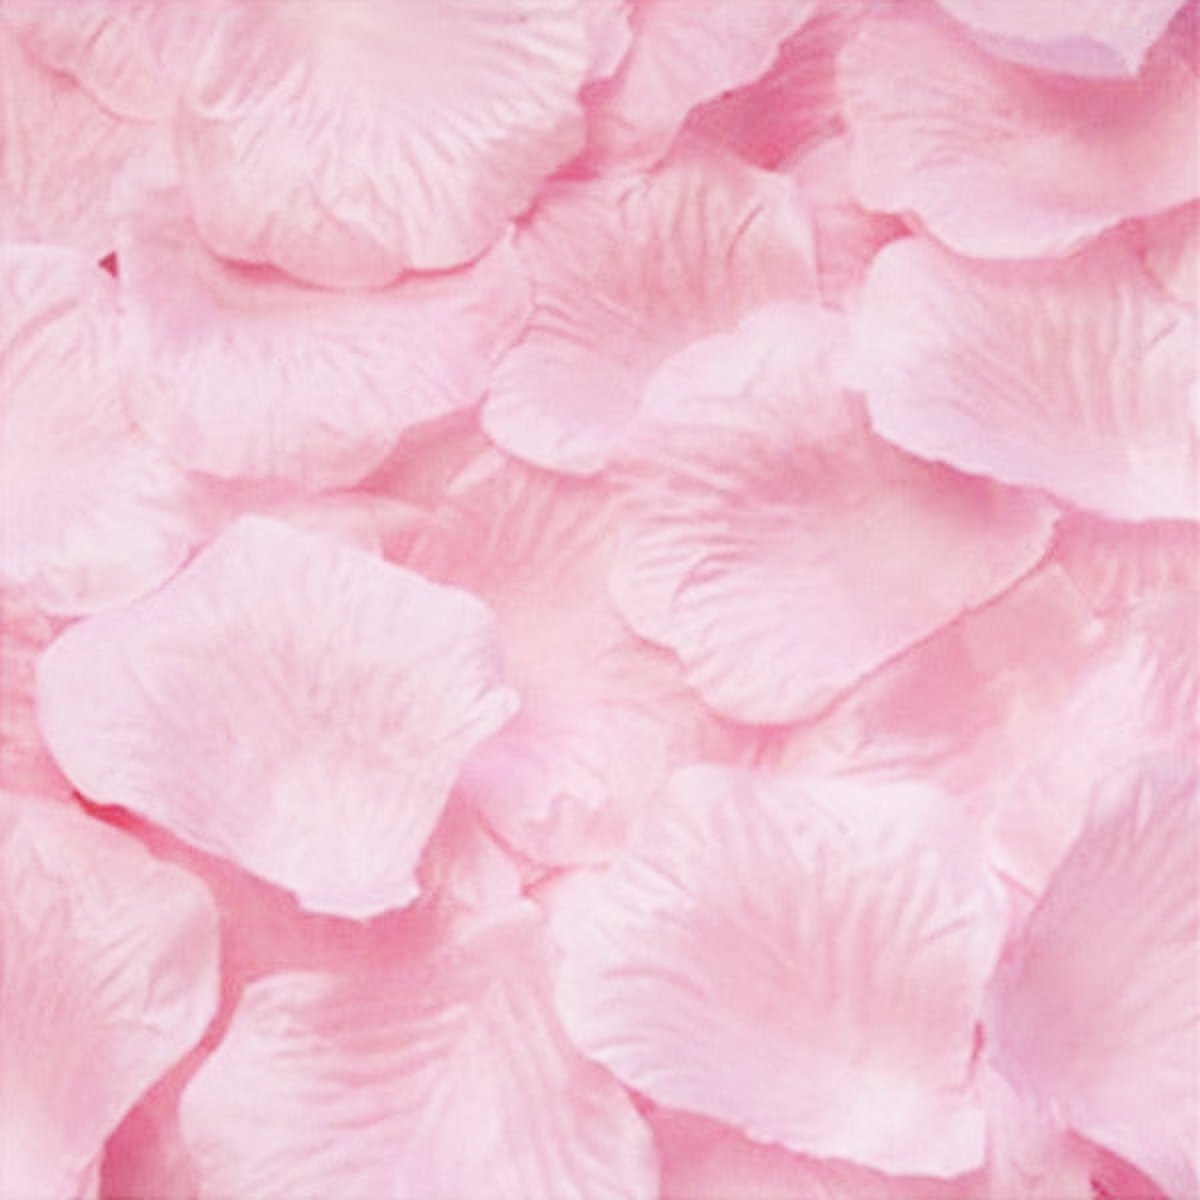 500pcs Rose Petals Flower Artificial Flowers Table Confetti Home Wedding Decorations - Light Pink - - Asia Sell